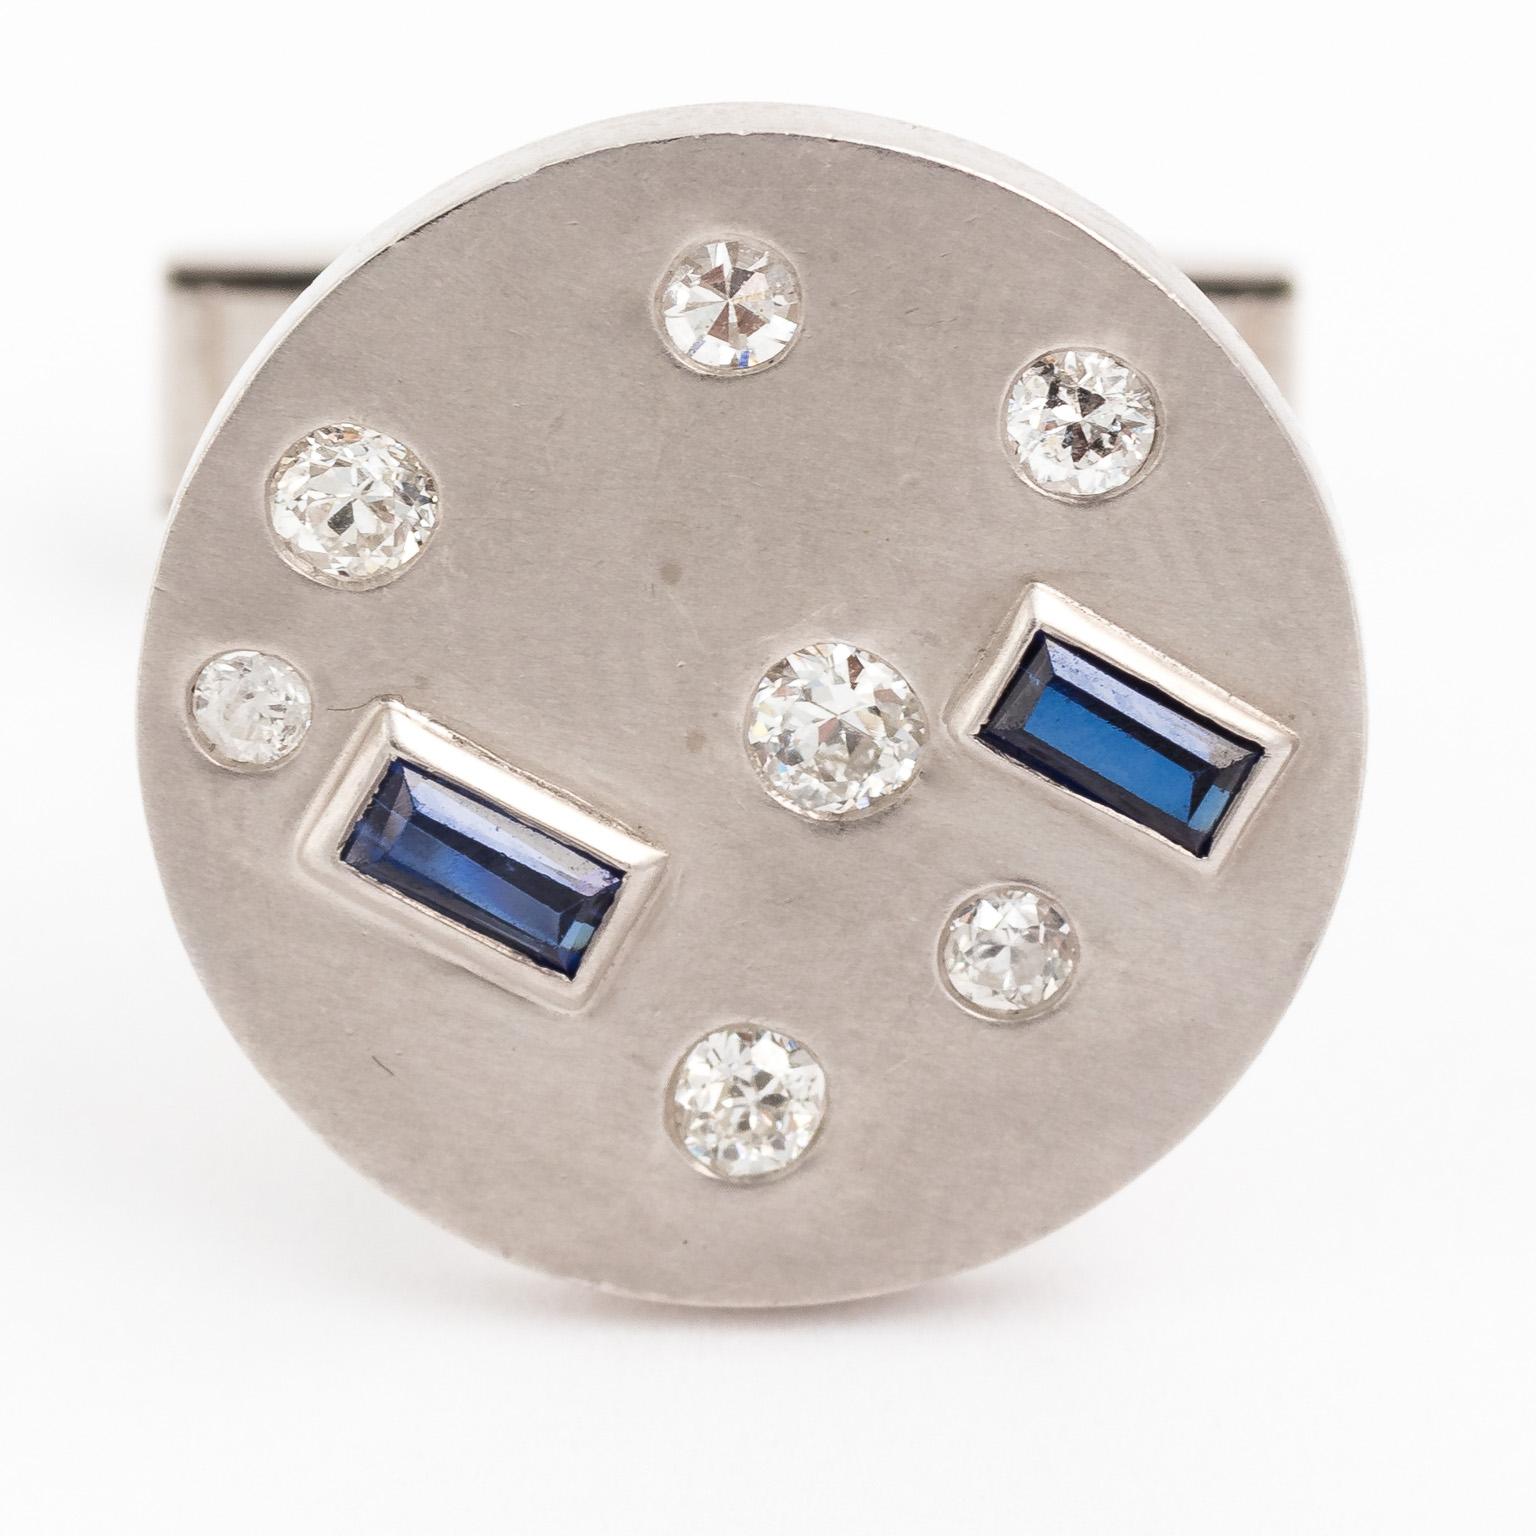 Circa 1970s white 14 karat gold cufflinks with approximately 0.50 pts of diamonds and 0.40 pts of Blue Sapphires. Brushed gold with hand finishing. Made in the United States. 